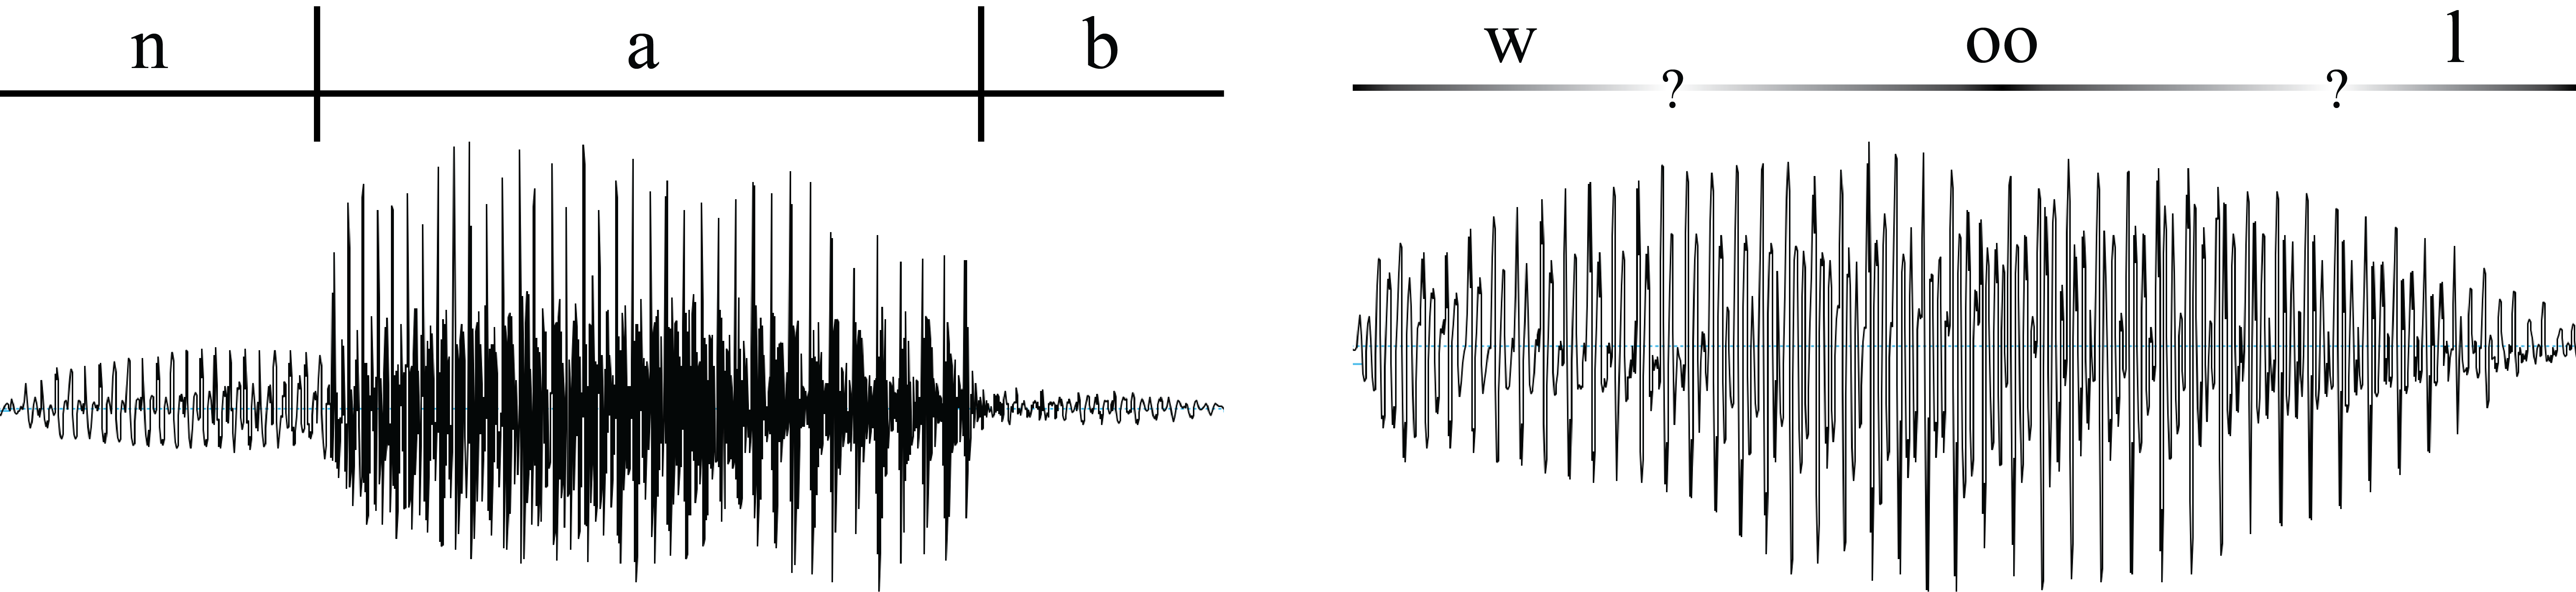 Two waveforms. Left waveform for the word nab is segmented into three distinct regions, labelled n, a, and b. The right waveform for the word wool has no clear segmentation between w, oo, and l.